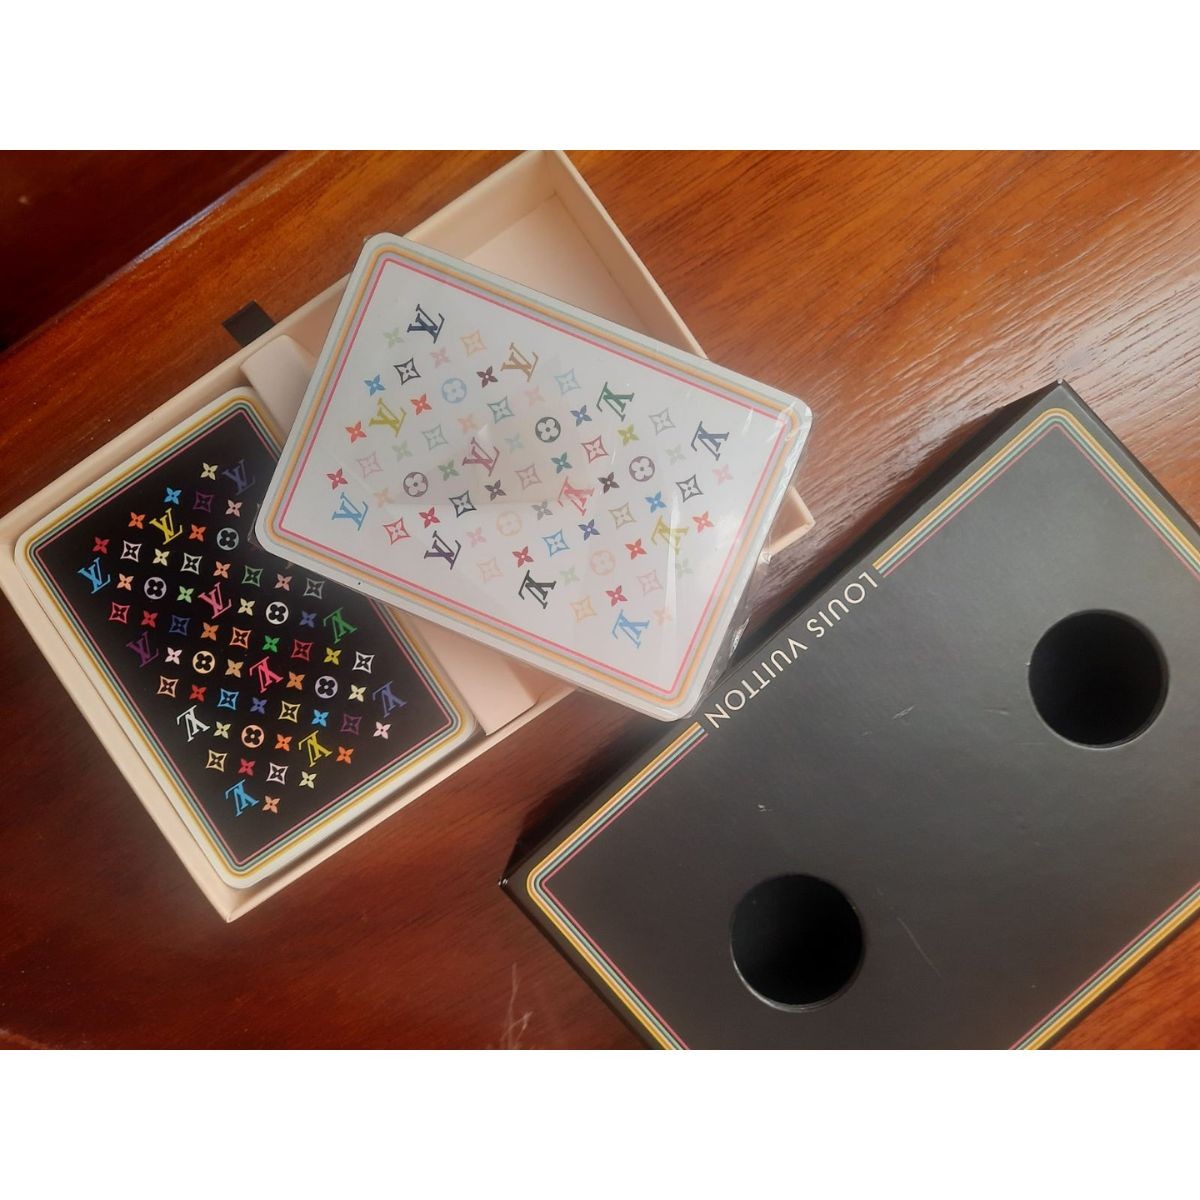 Louis Vuitton, Other, Louis Vuitton Multicolor Murakami Playing Cards